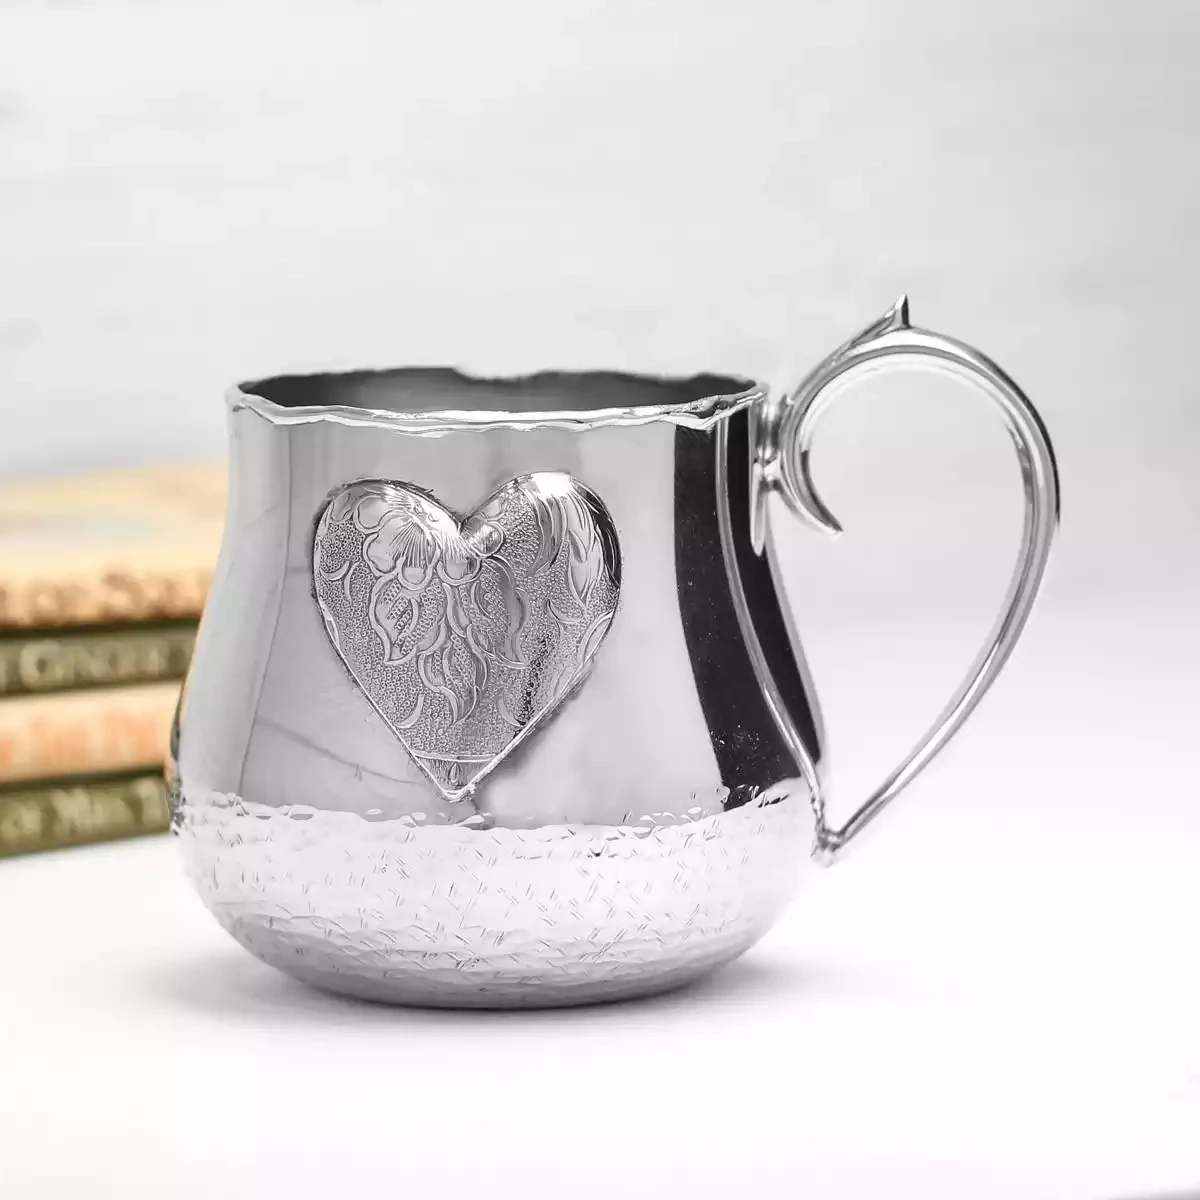 Pewter Cup With Embossed Heart Decoration by Jim Stringer